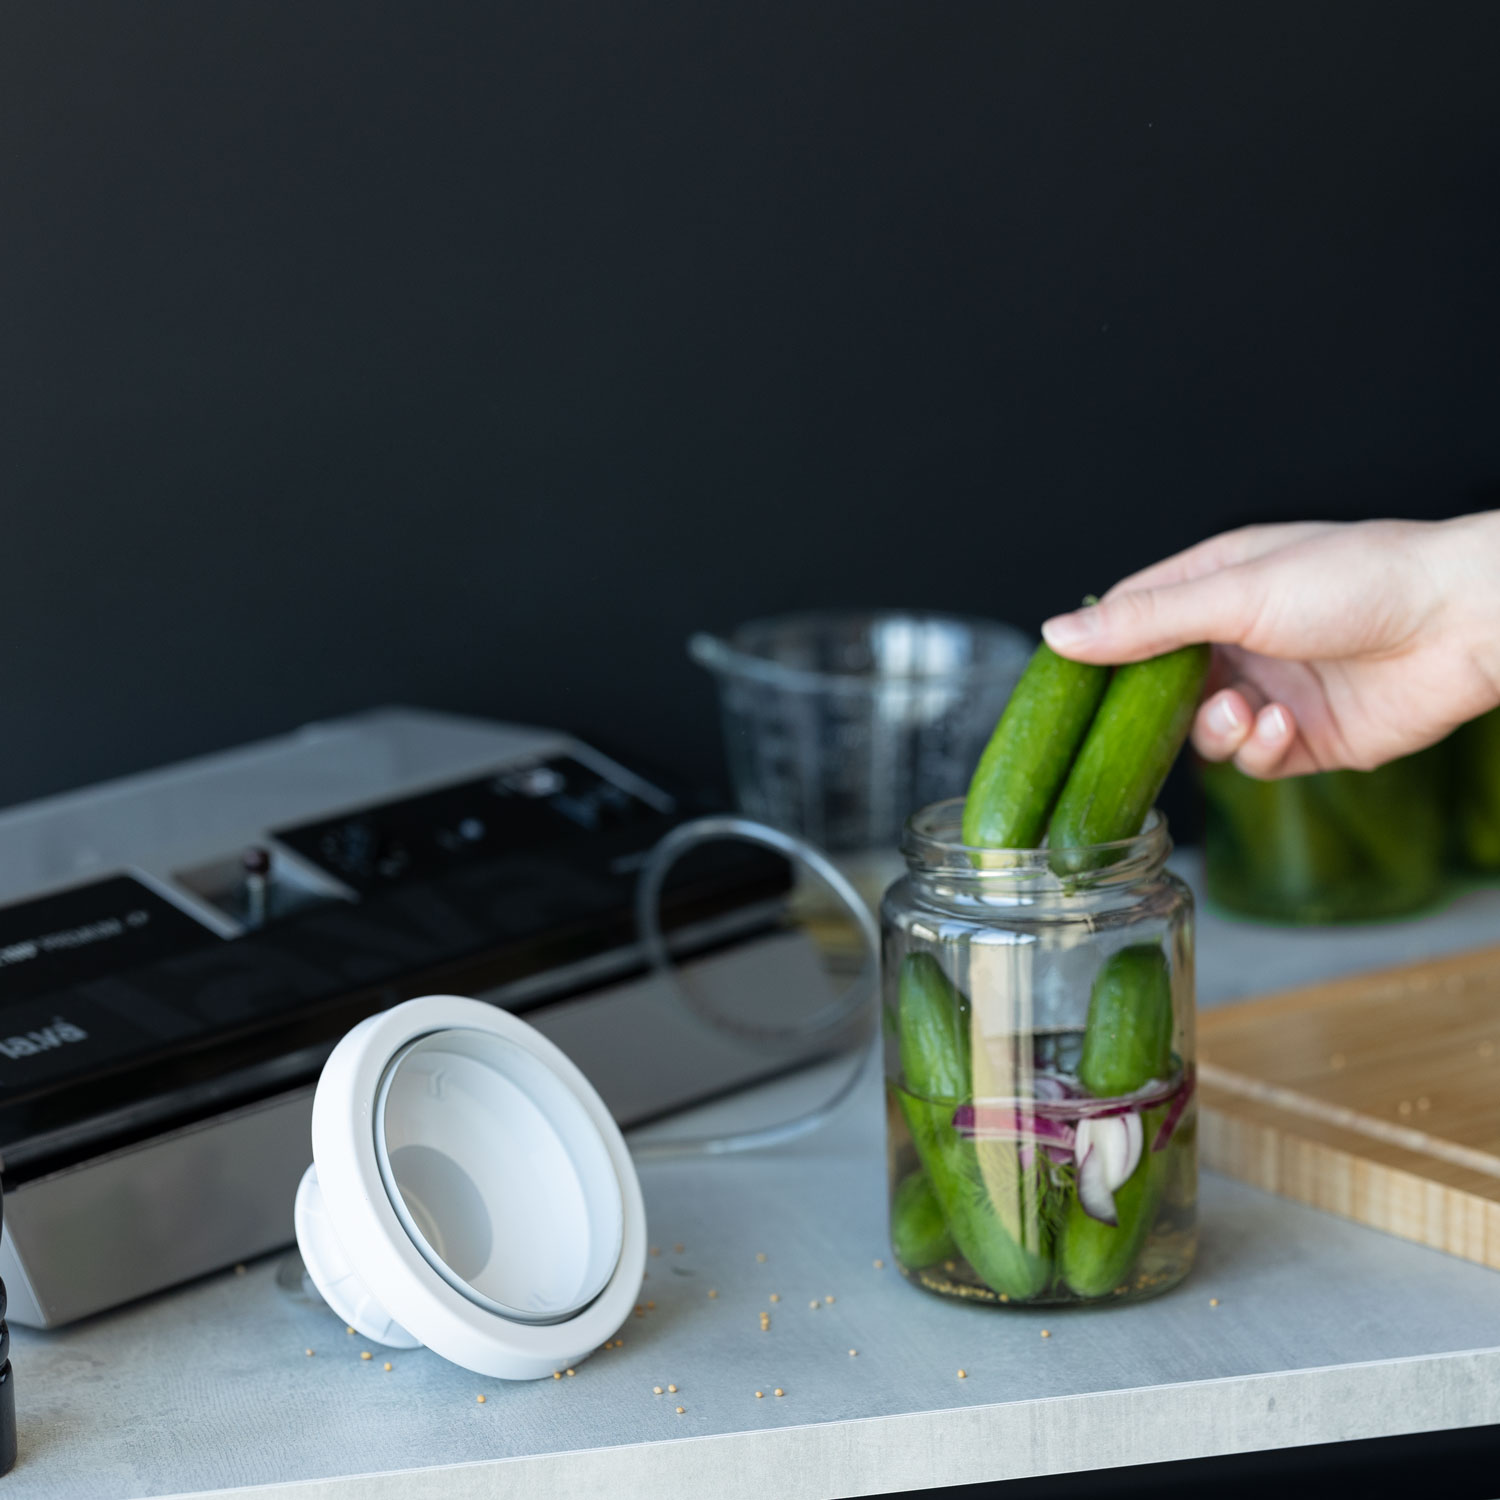 Cucumbers are placed in a preserving jar to make pickles using a vacuum sealer